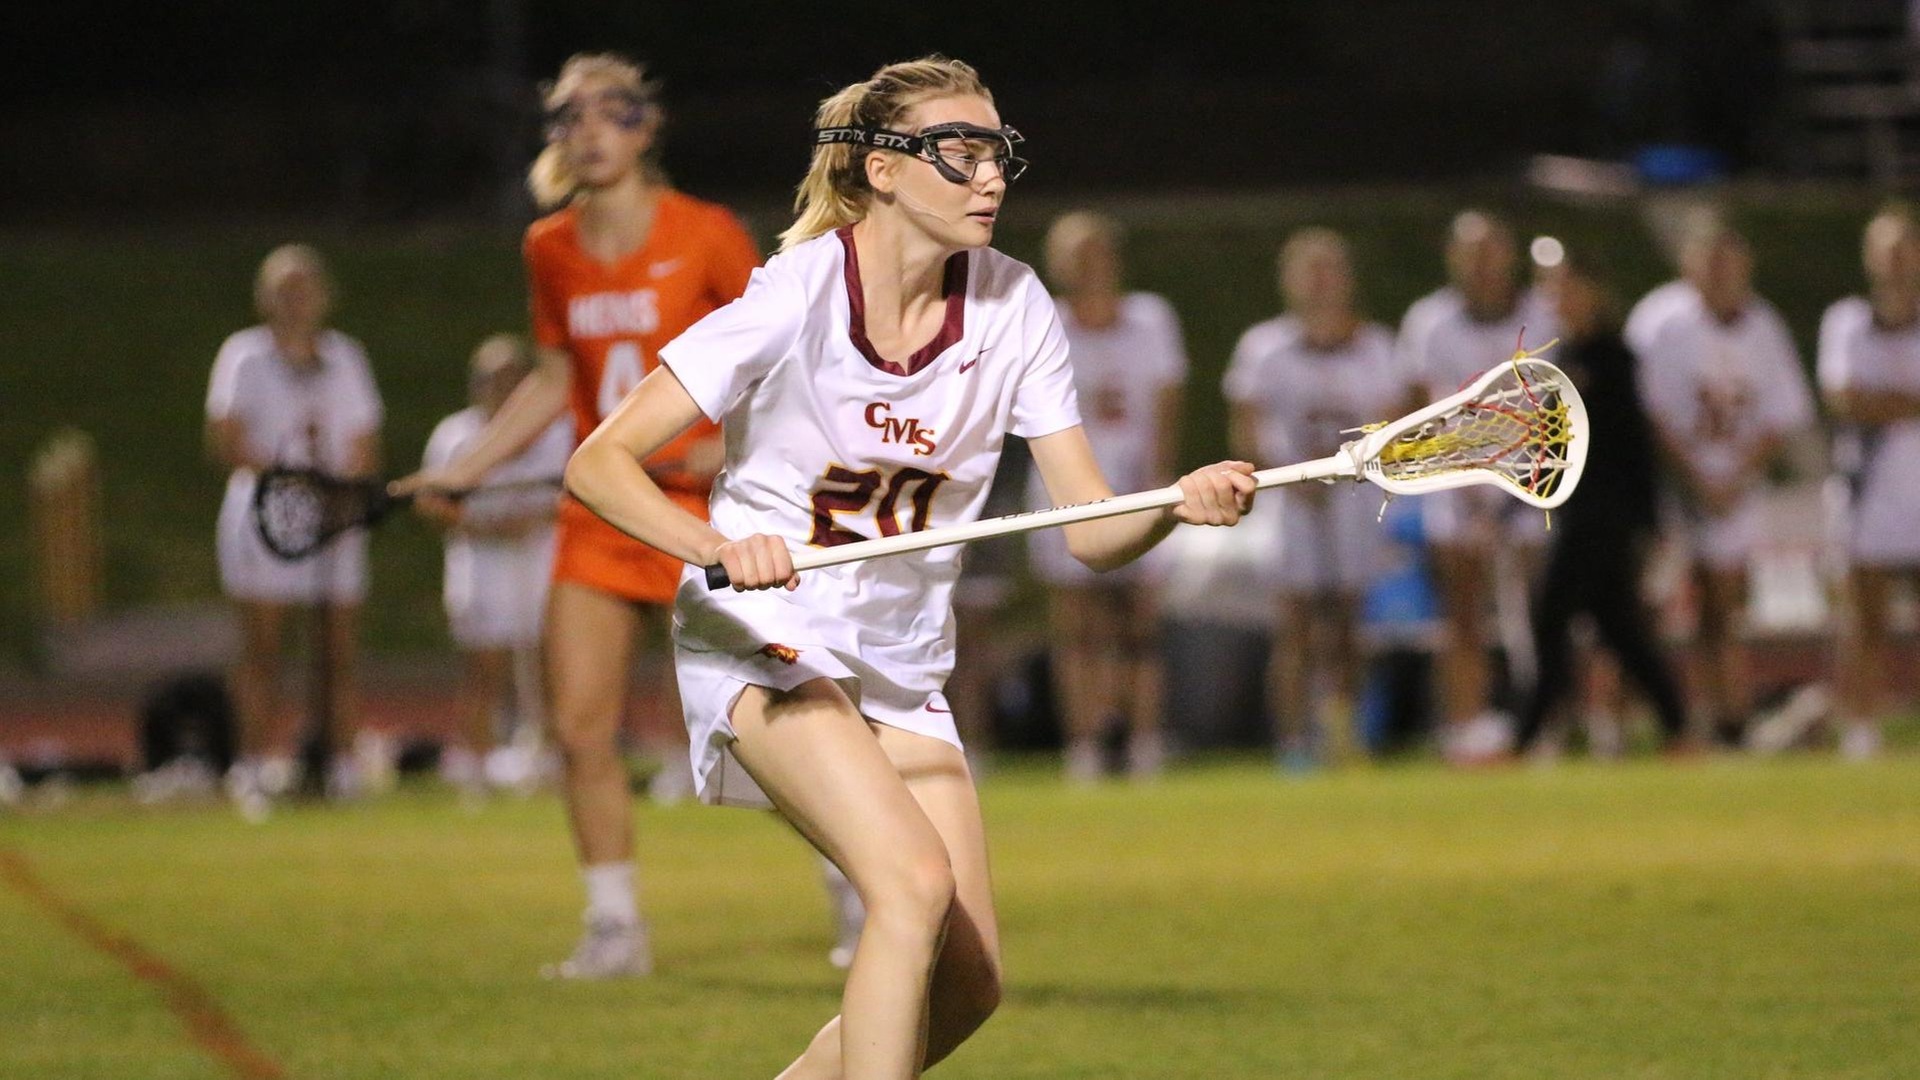 Catherine Murphy had 4 goals, 3 in the first quarter (photo by Eva Fernandez)